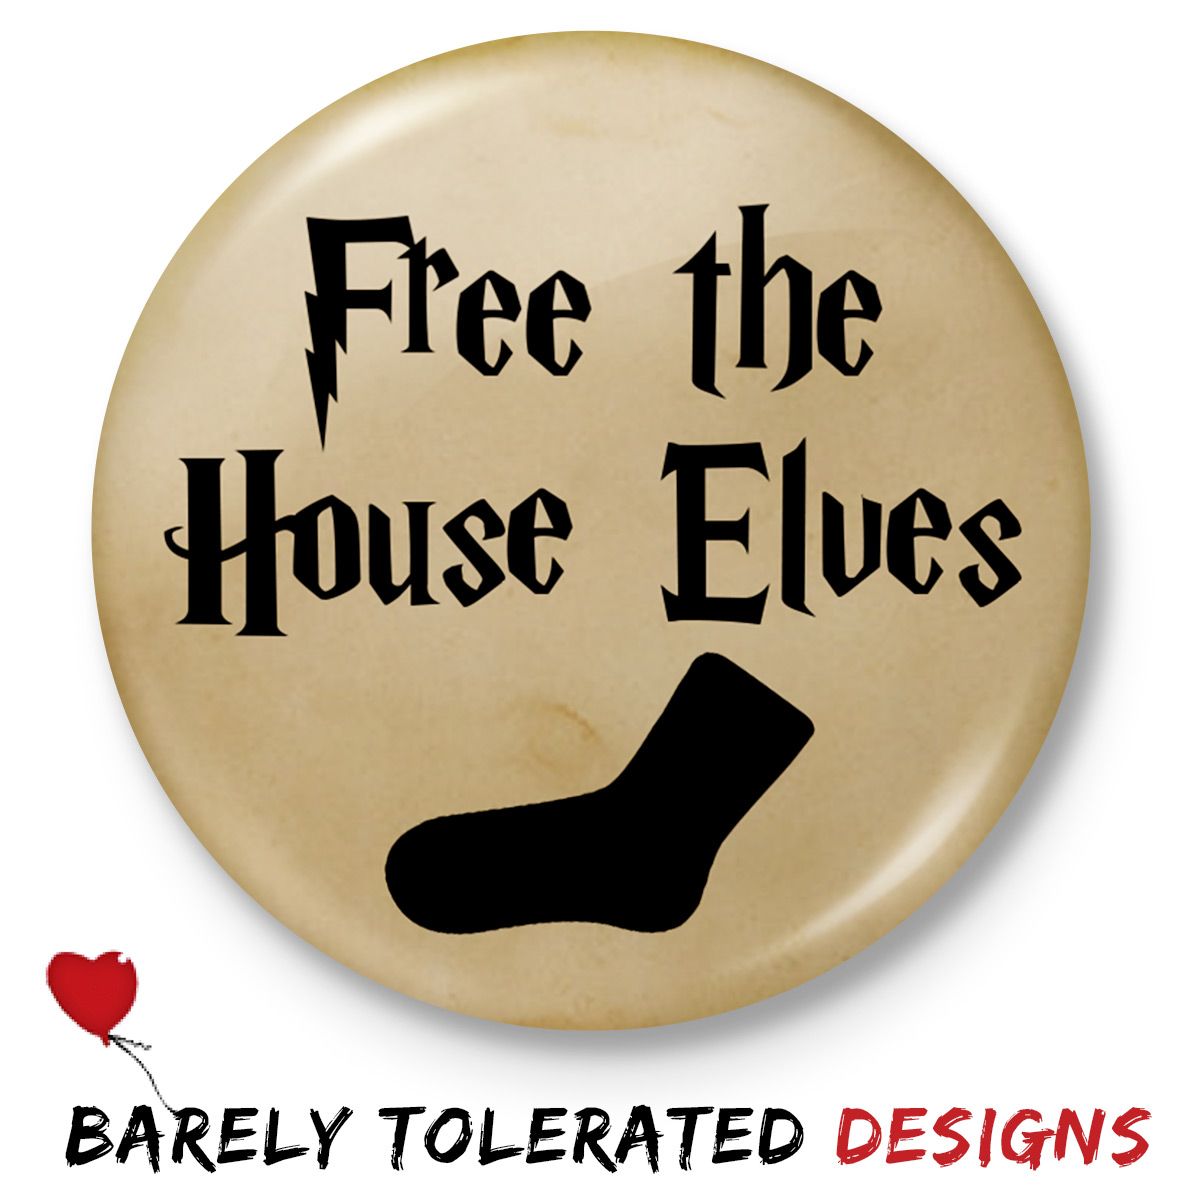 Free The House Elves Image